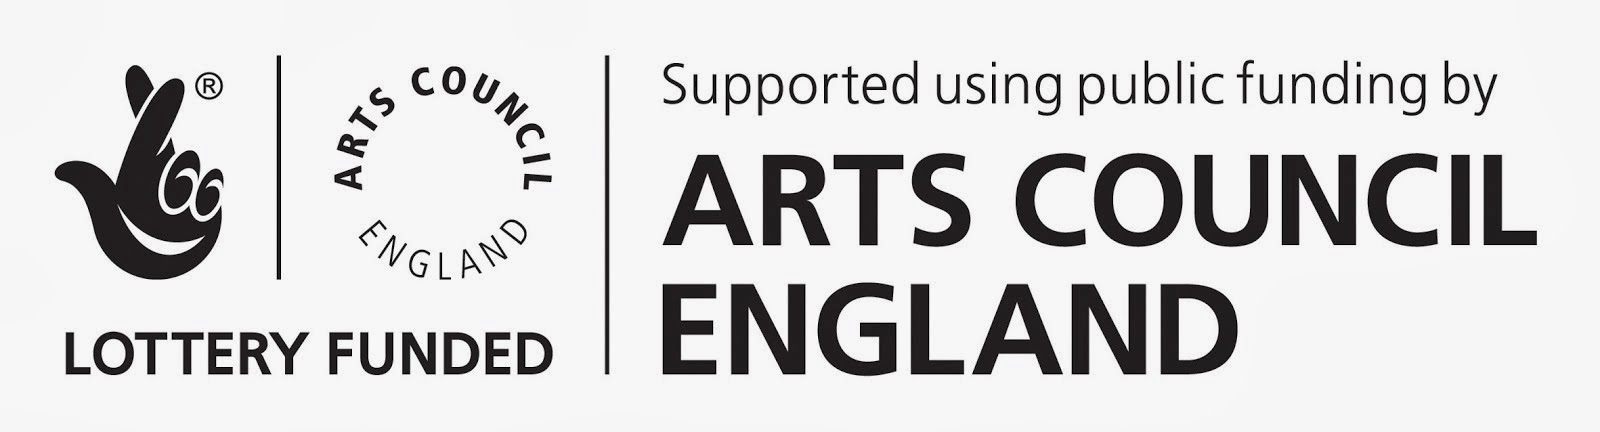 Arts Council funded.